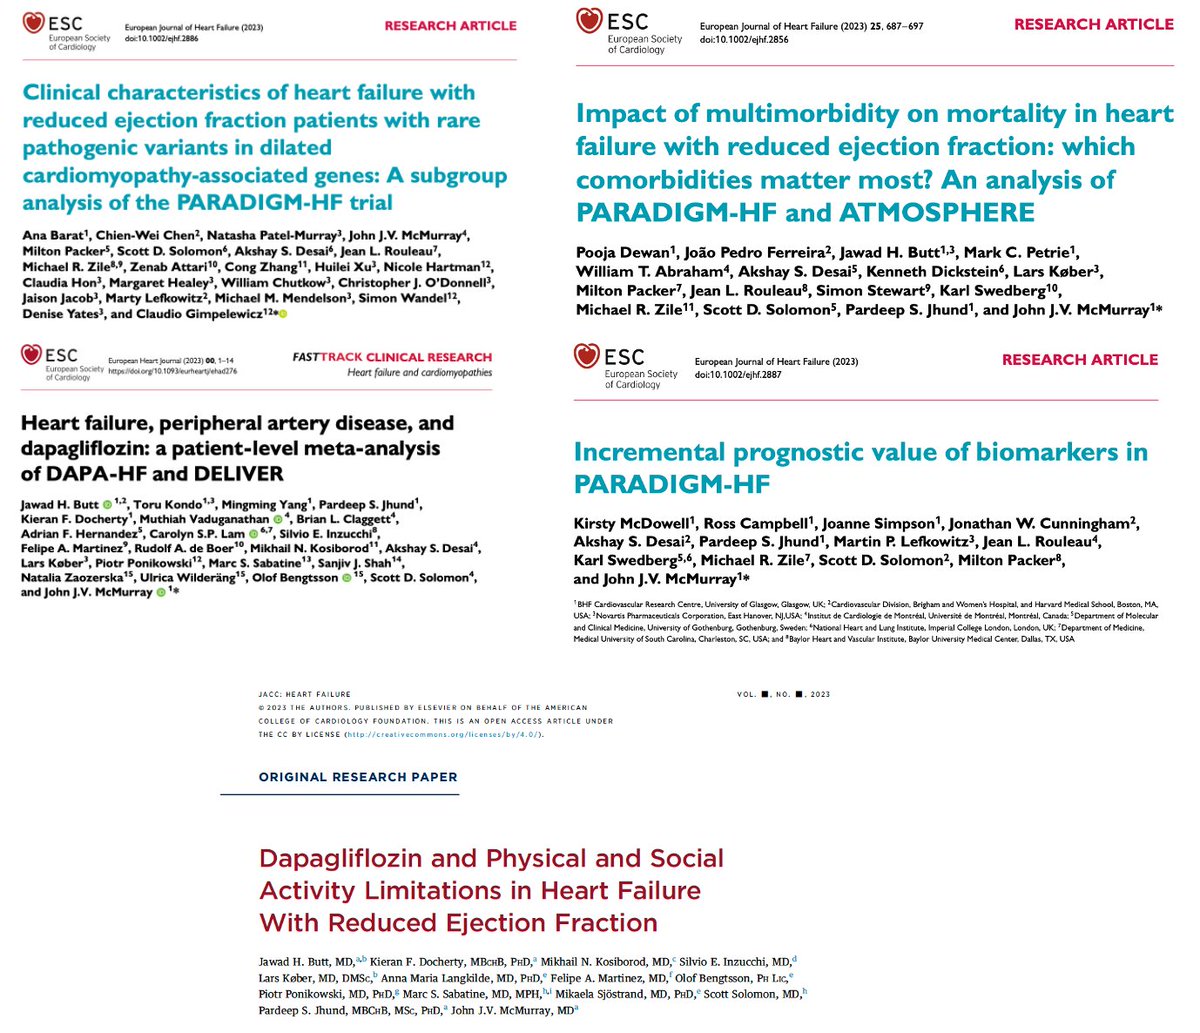 Lots of recent publications from the group @UoGHeartFailure to catch up on! A select few are highlighted below - for a full up-to-date list of publications from the group go to bit.ly/UoG_HF_research